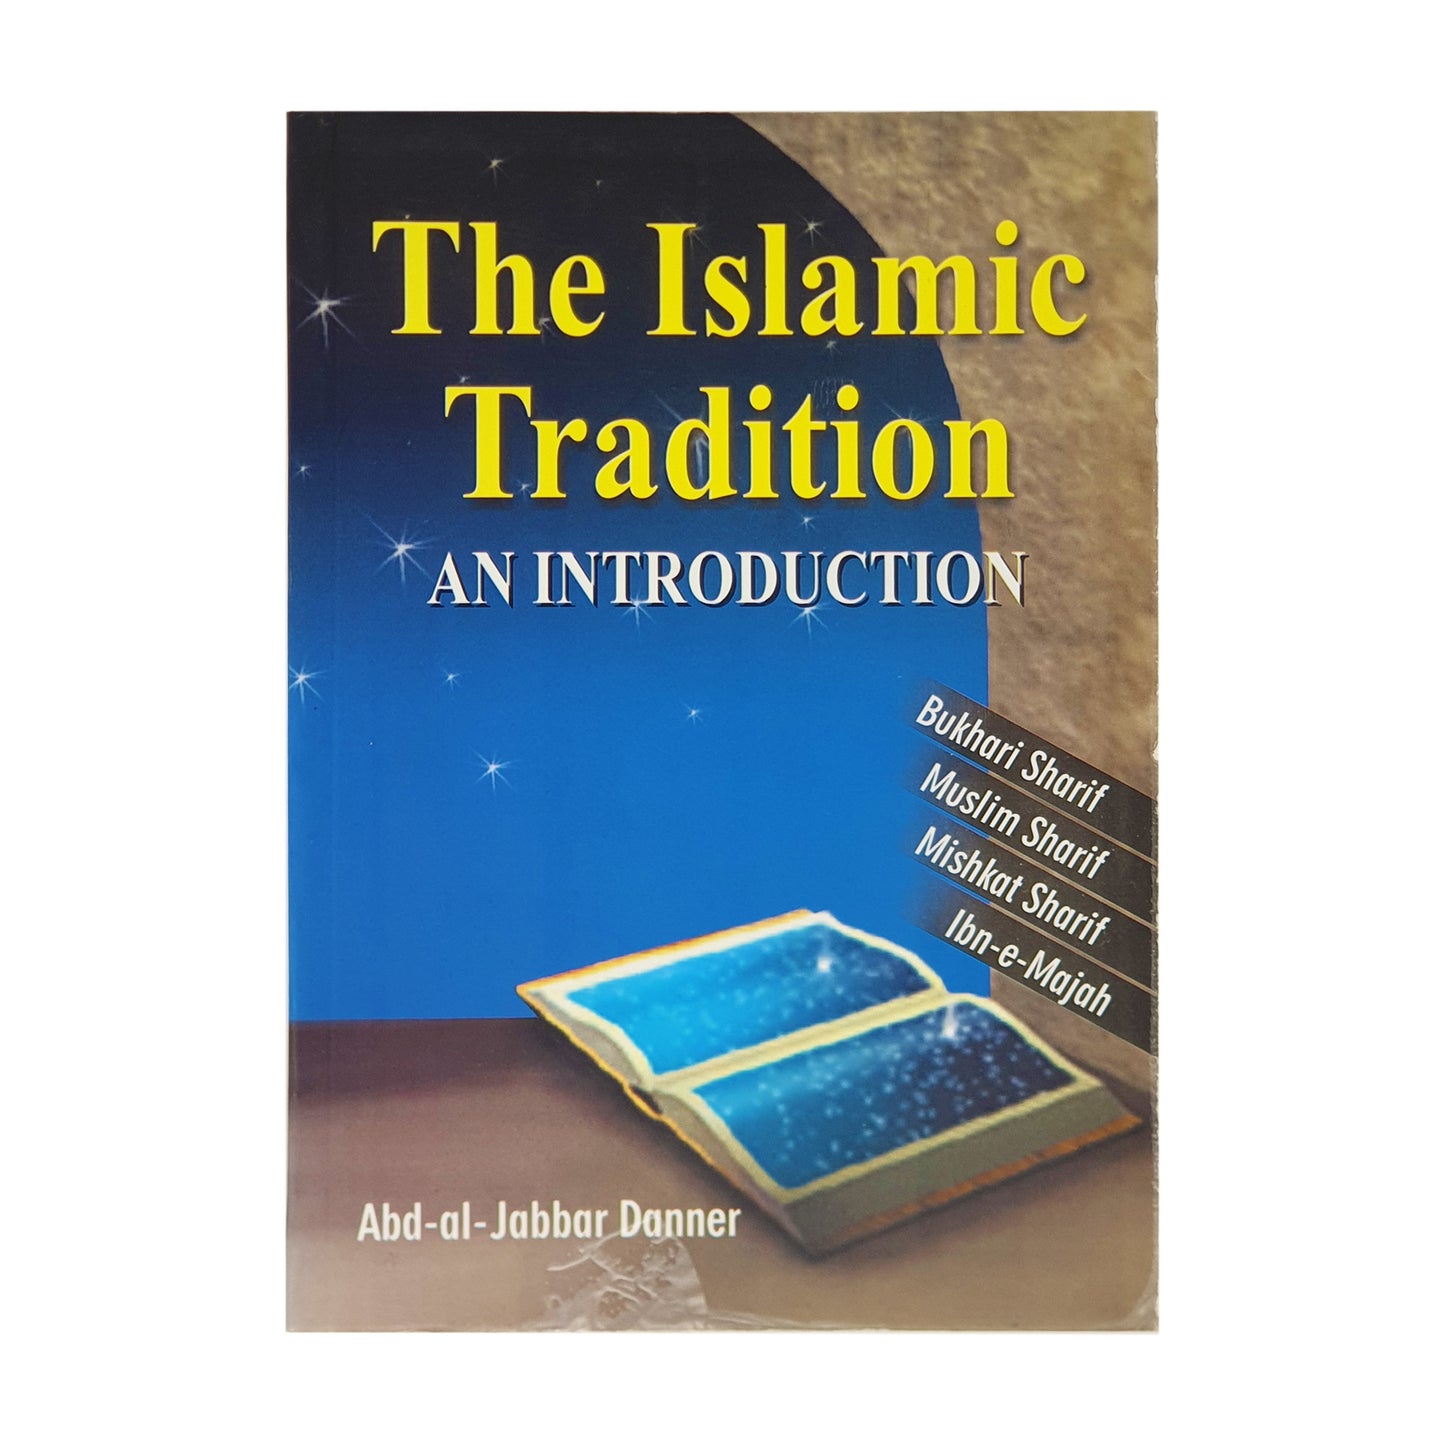 The Islamic Tradition - An Introduction